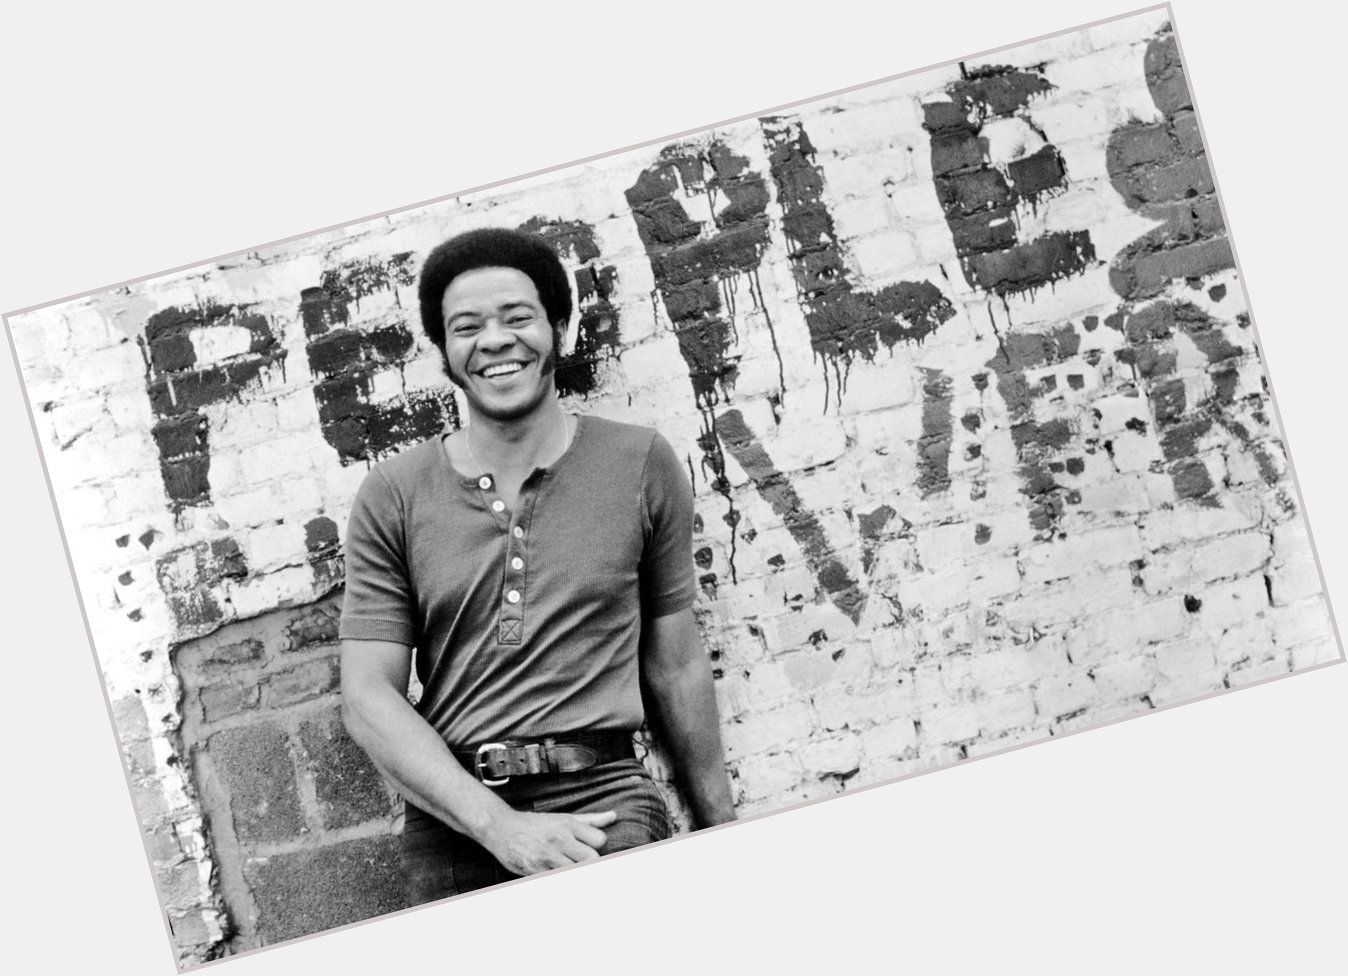 Happy Birthday to Bill Withers, man!   